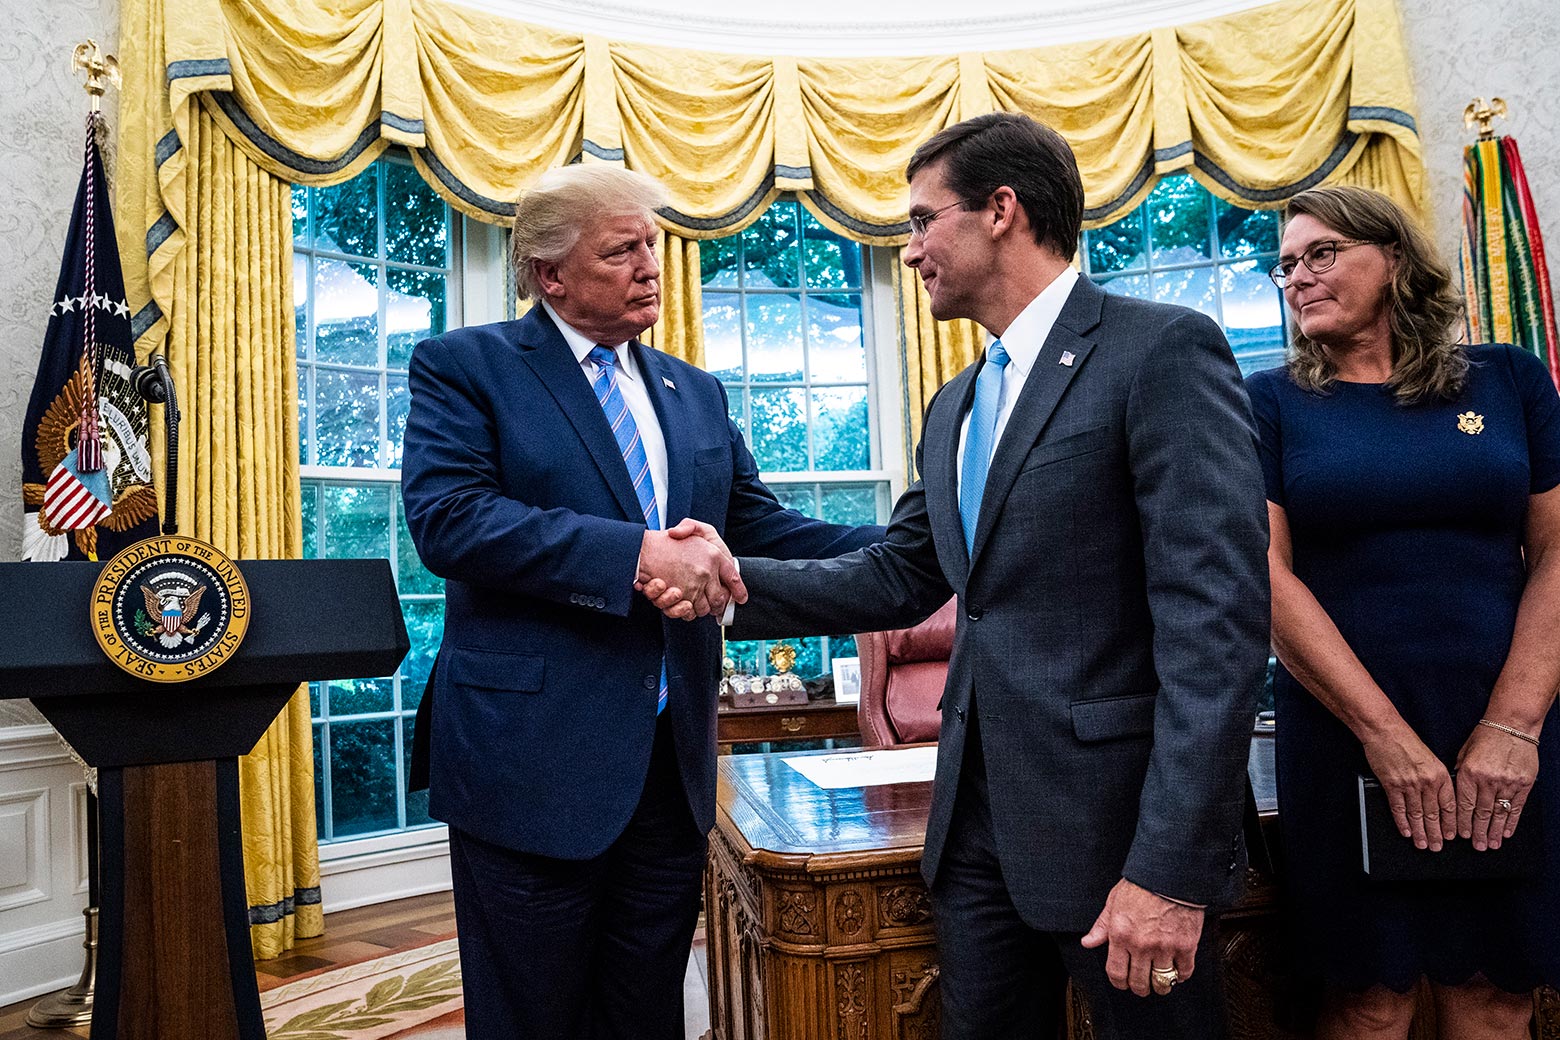 Mark Esper shakes hands with the president as his wife, Leah Esper, looks on.